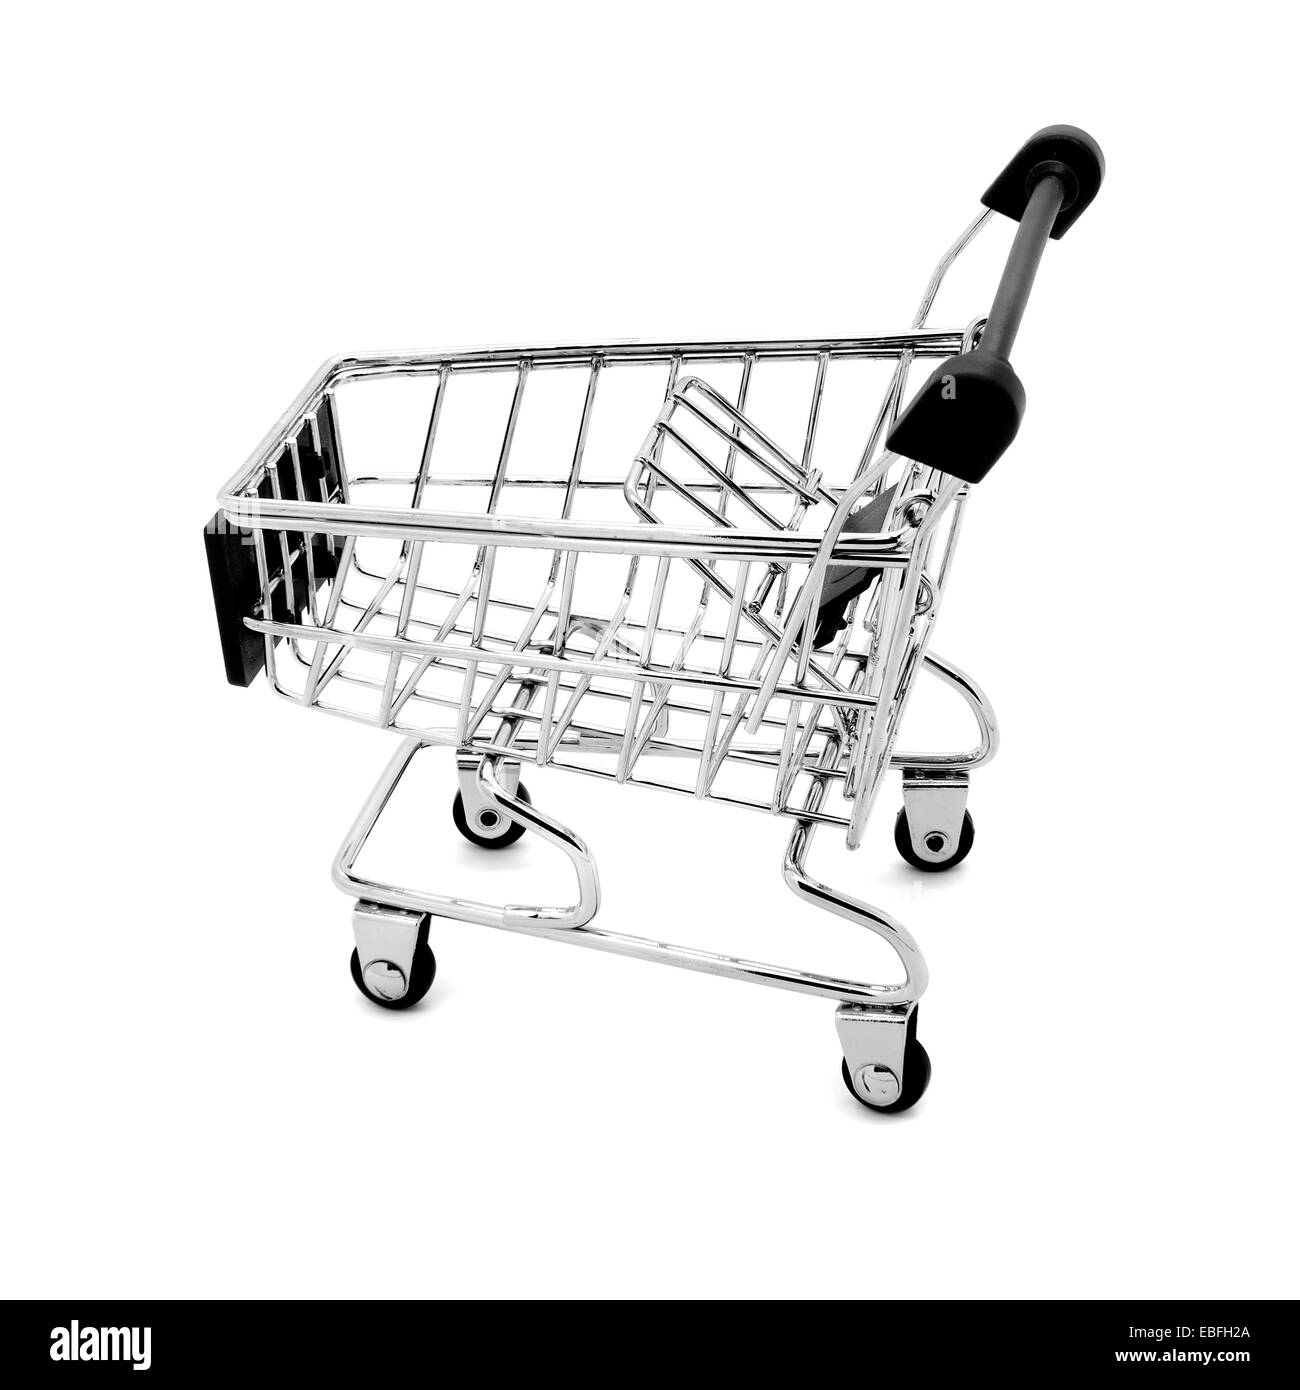 Shopping cart on a white background. Stock Photo